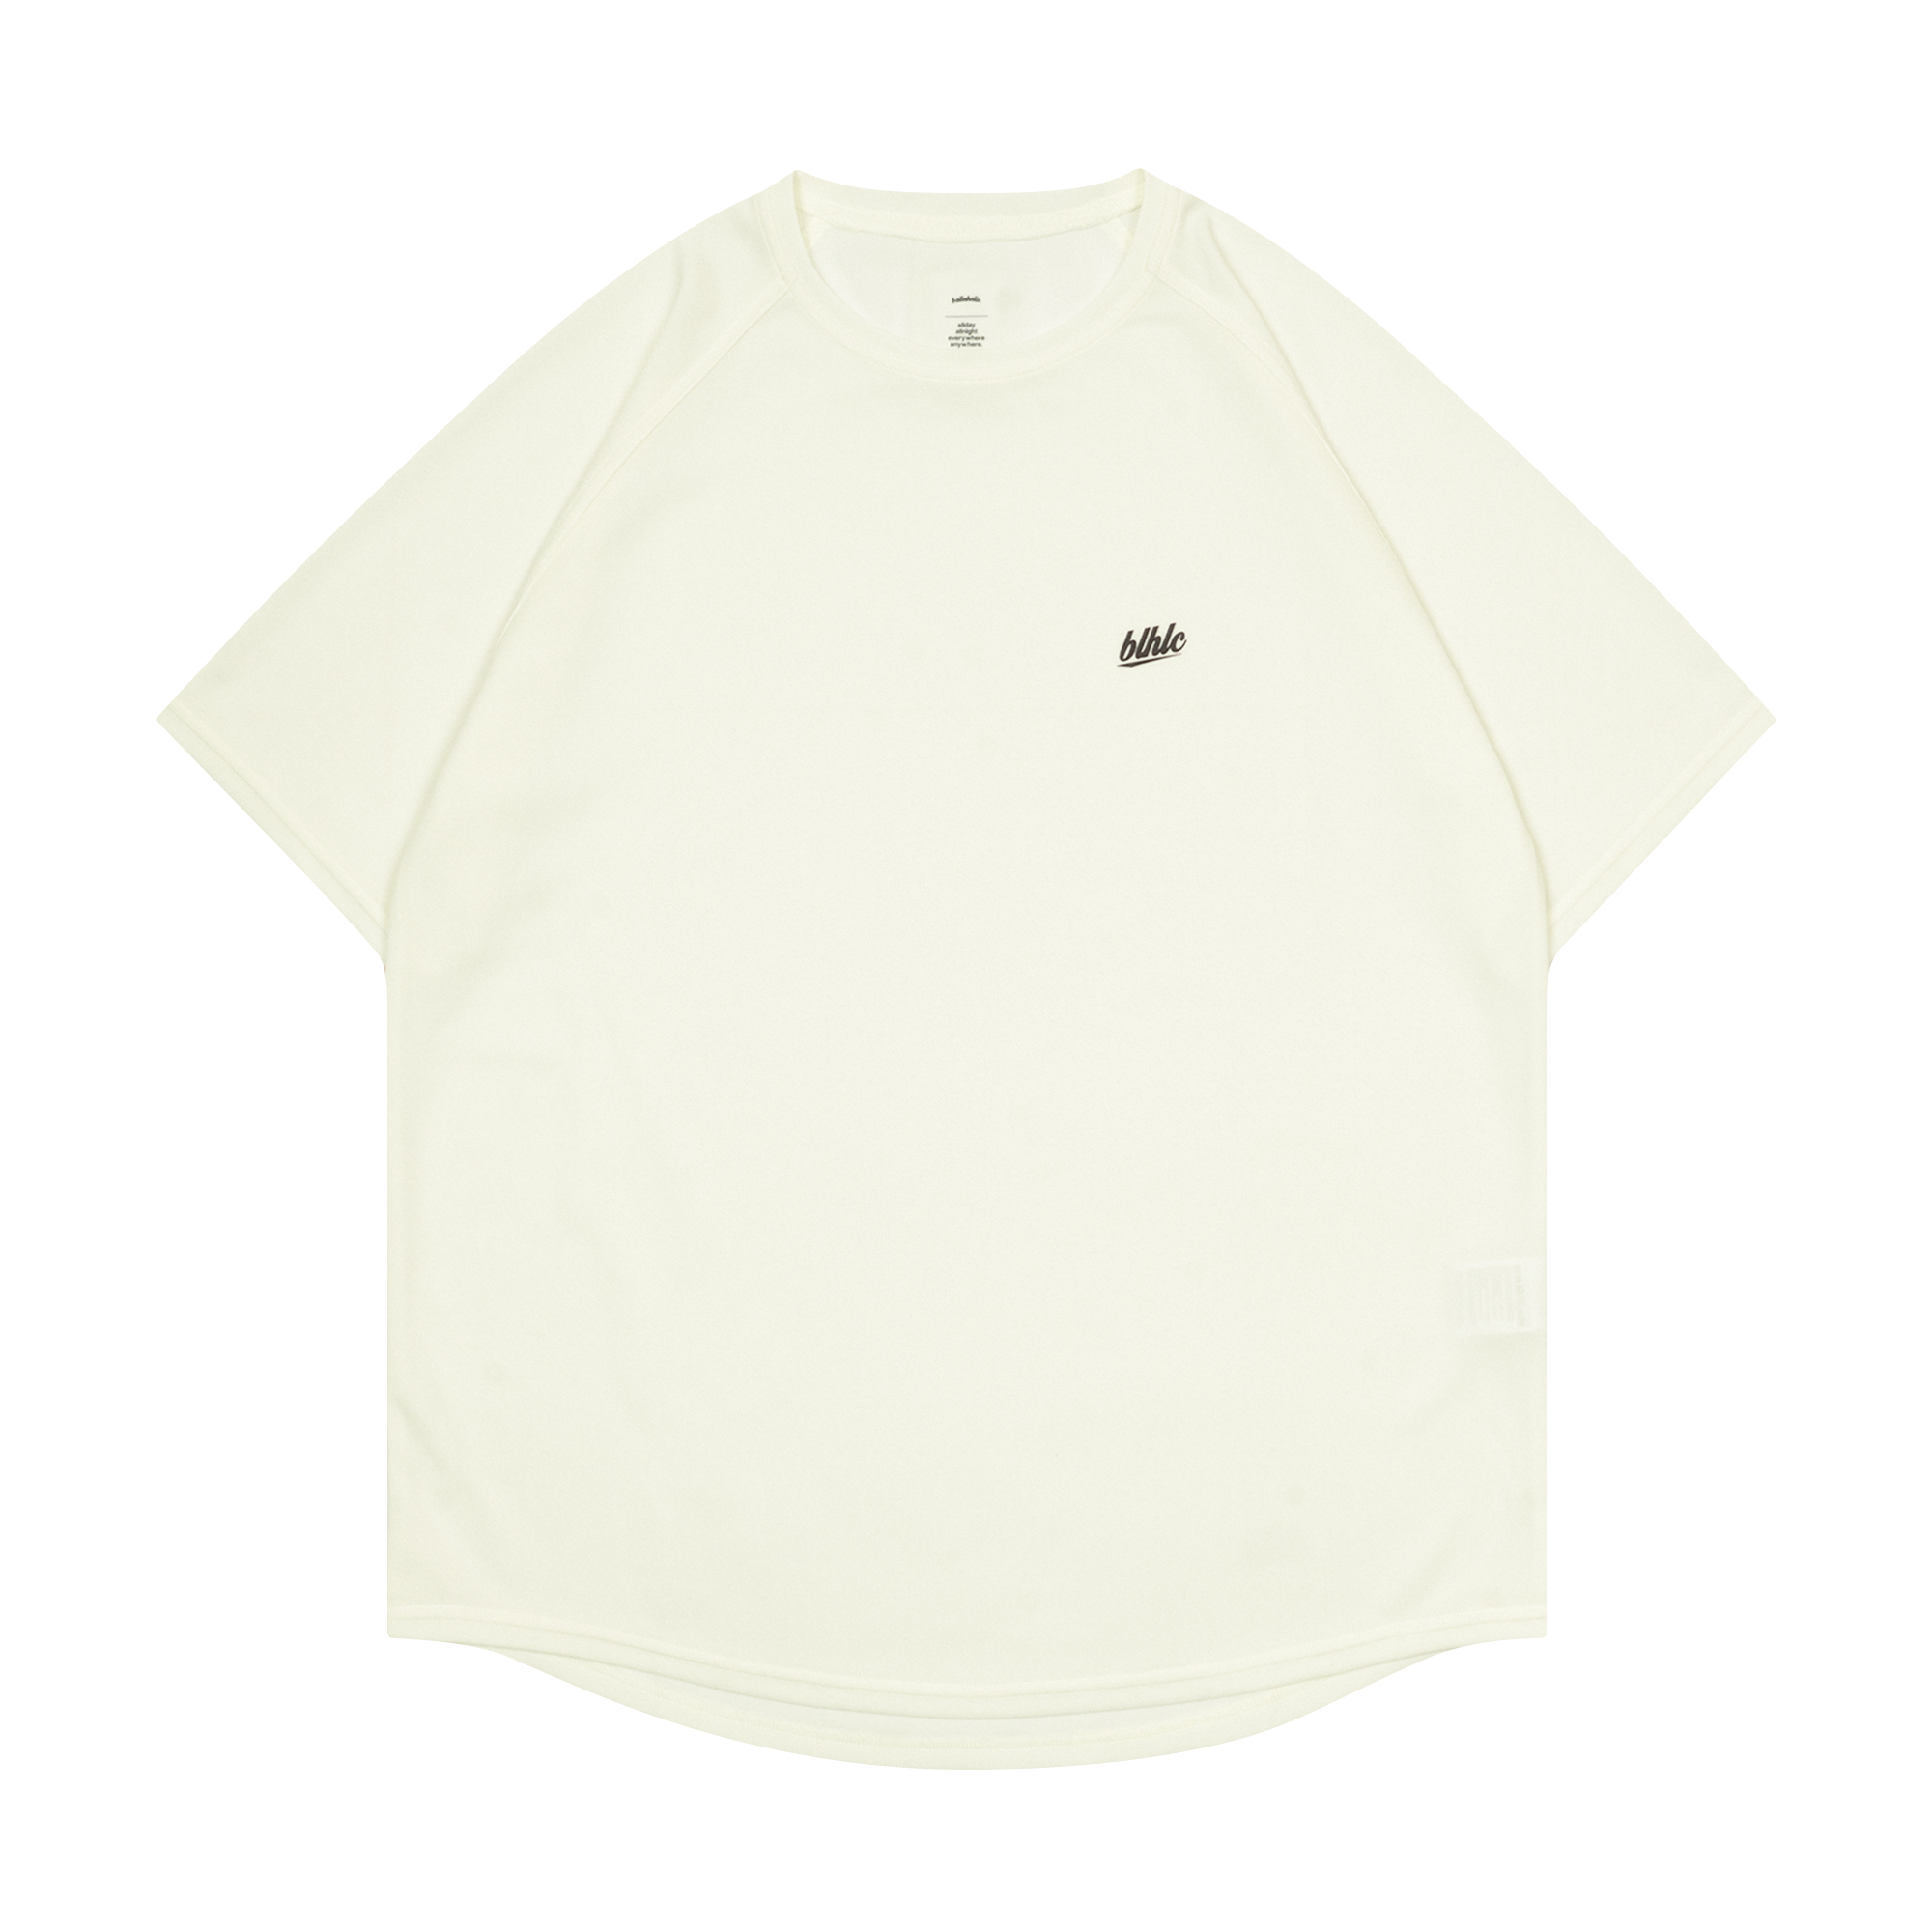 blhlc Cool Tee (off white/black)